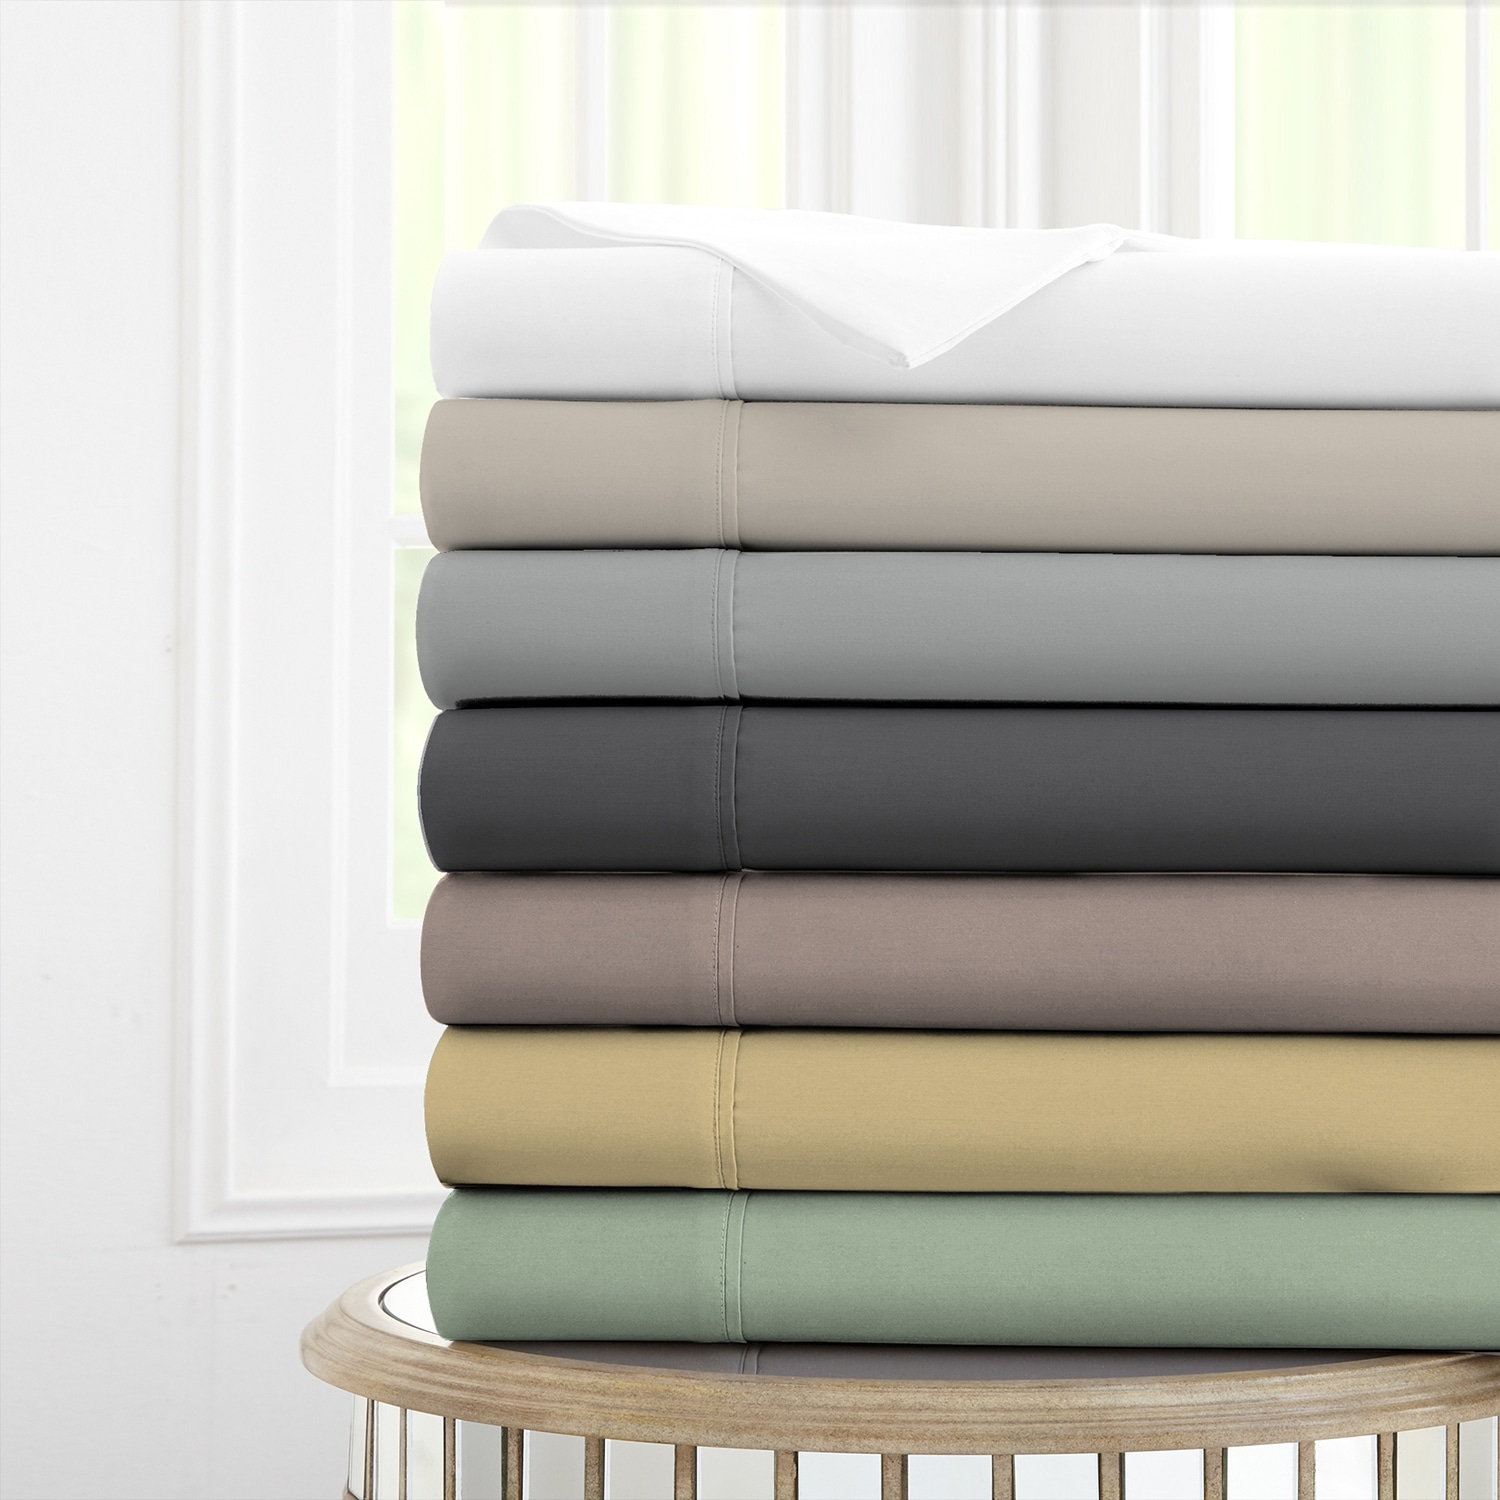 Percale Bed Sheet Sets - Bed Bath & Beyond